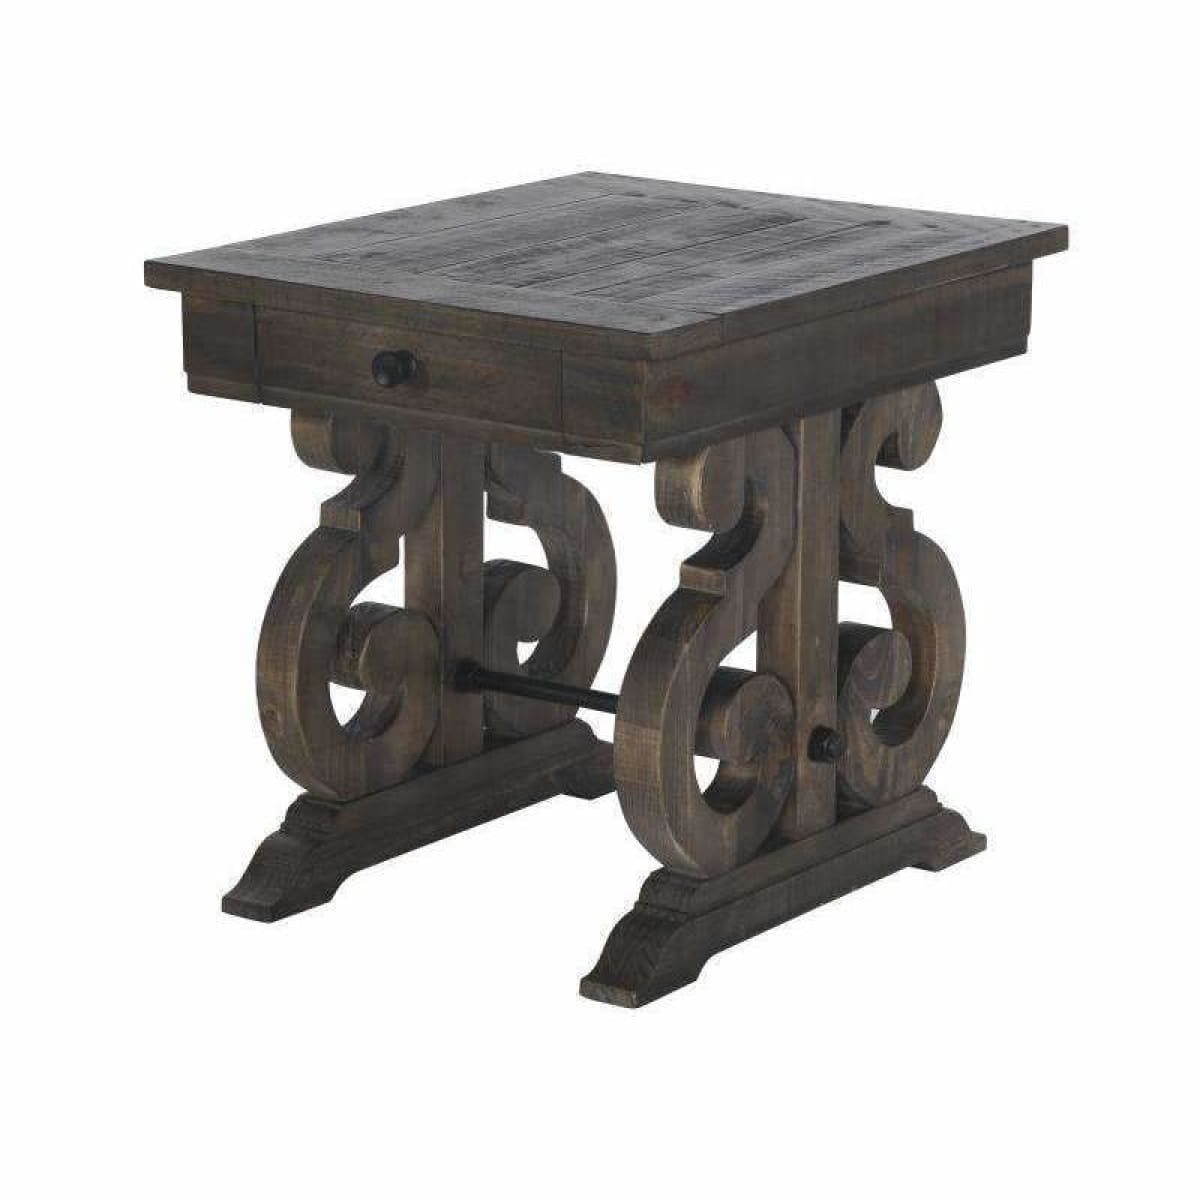 Bellamy Rectangular End Table - END TABLE/SIDE TABLE